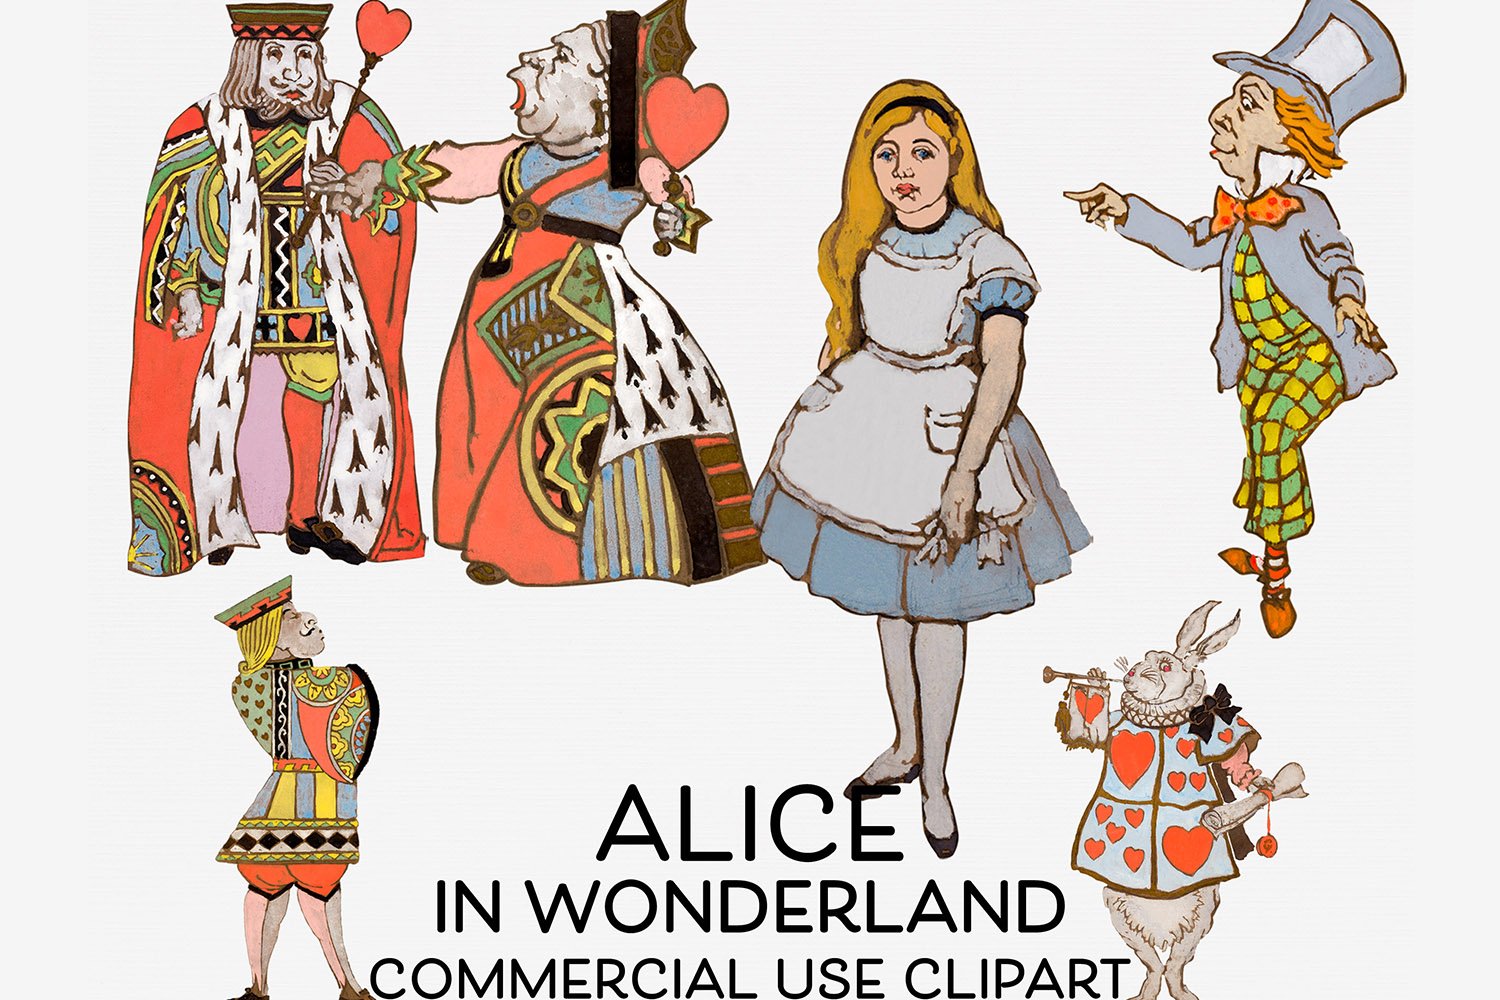 Color images of characters from the fairy tale about Alice.